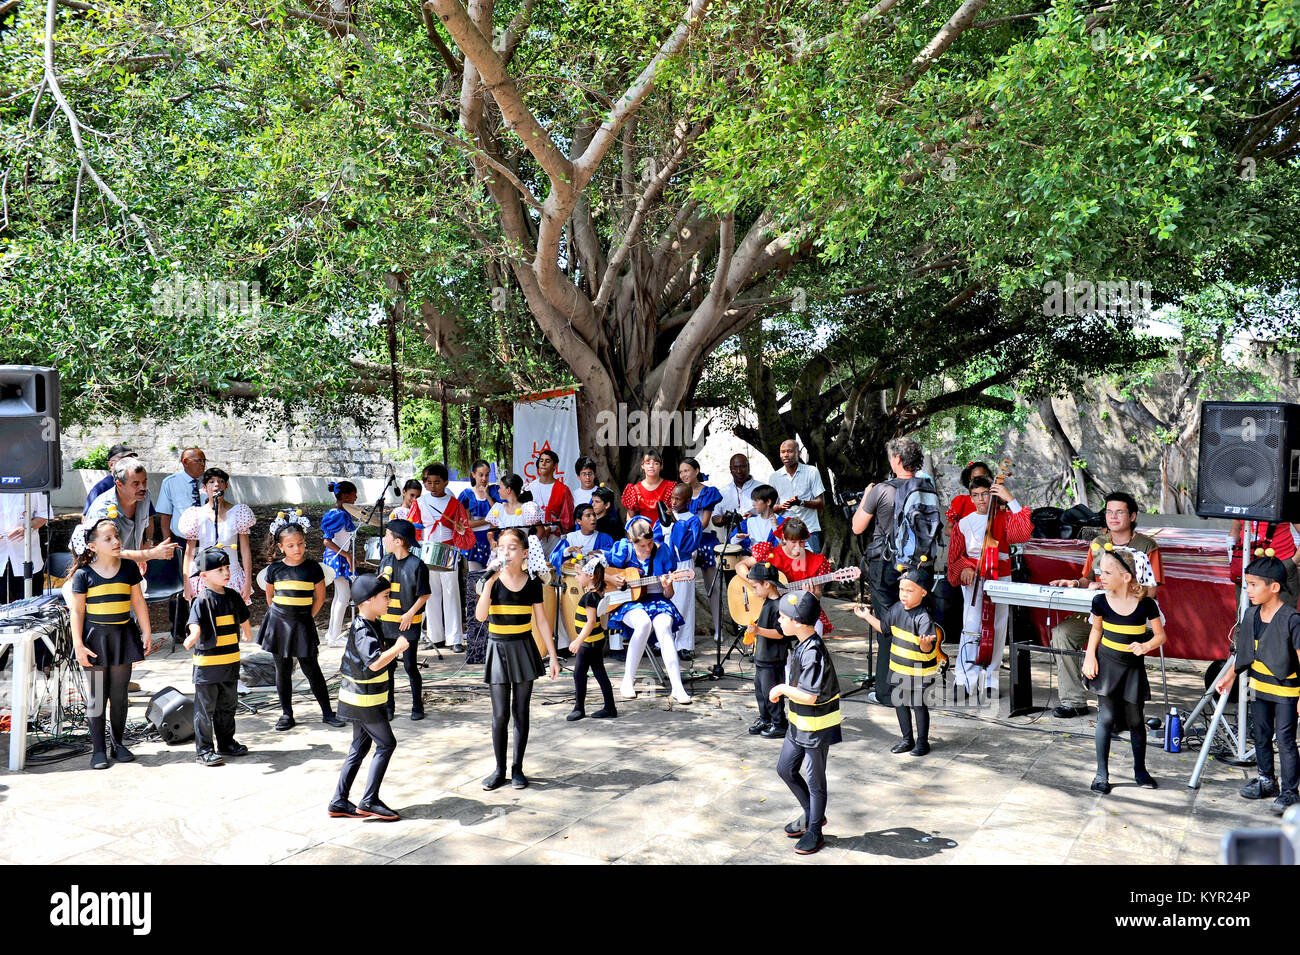 HAVANA, CUBA, MAY 5, 2009. Children dressed as bumblebees dancing in the Fit Cuba 2009 tourism festival in Havana, Cuba, on May 5th, 2009. Stock Photo